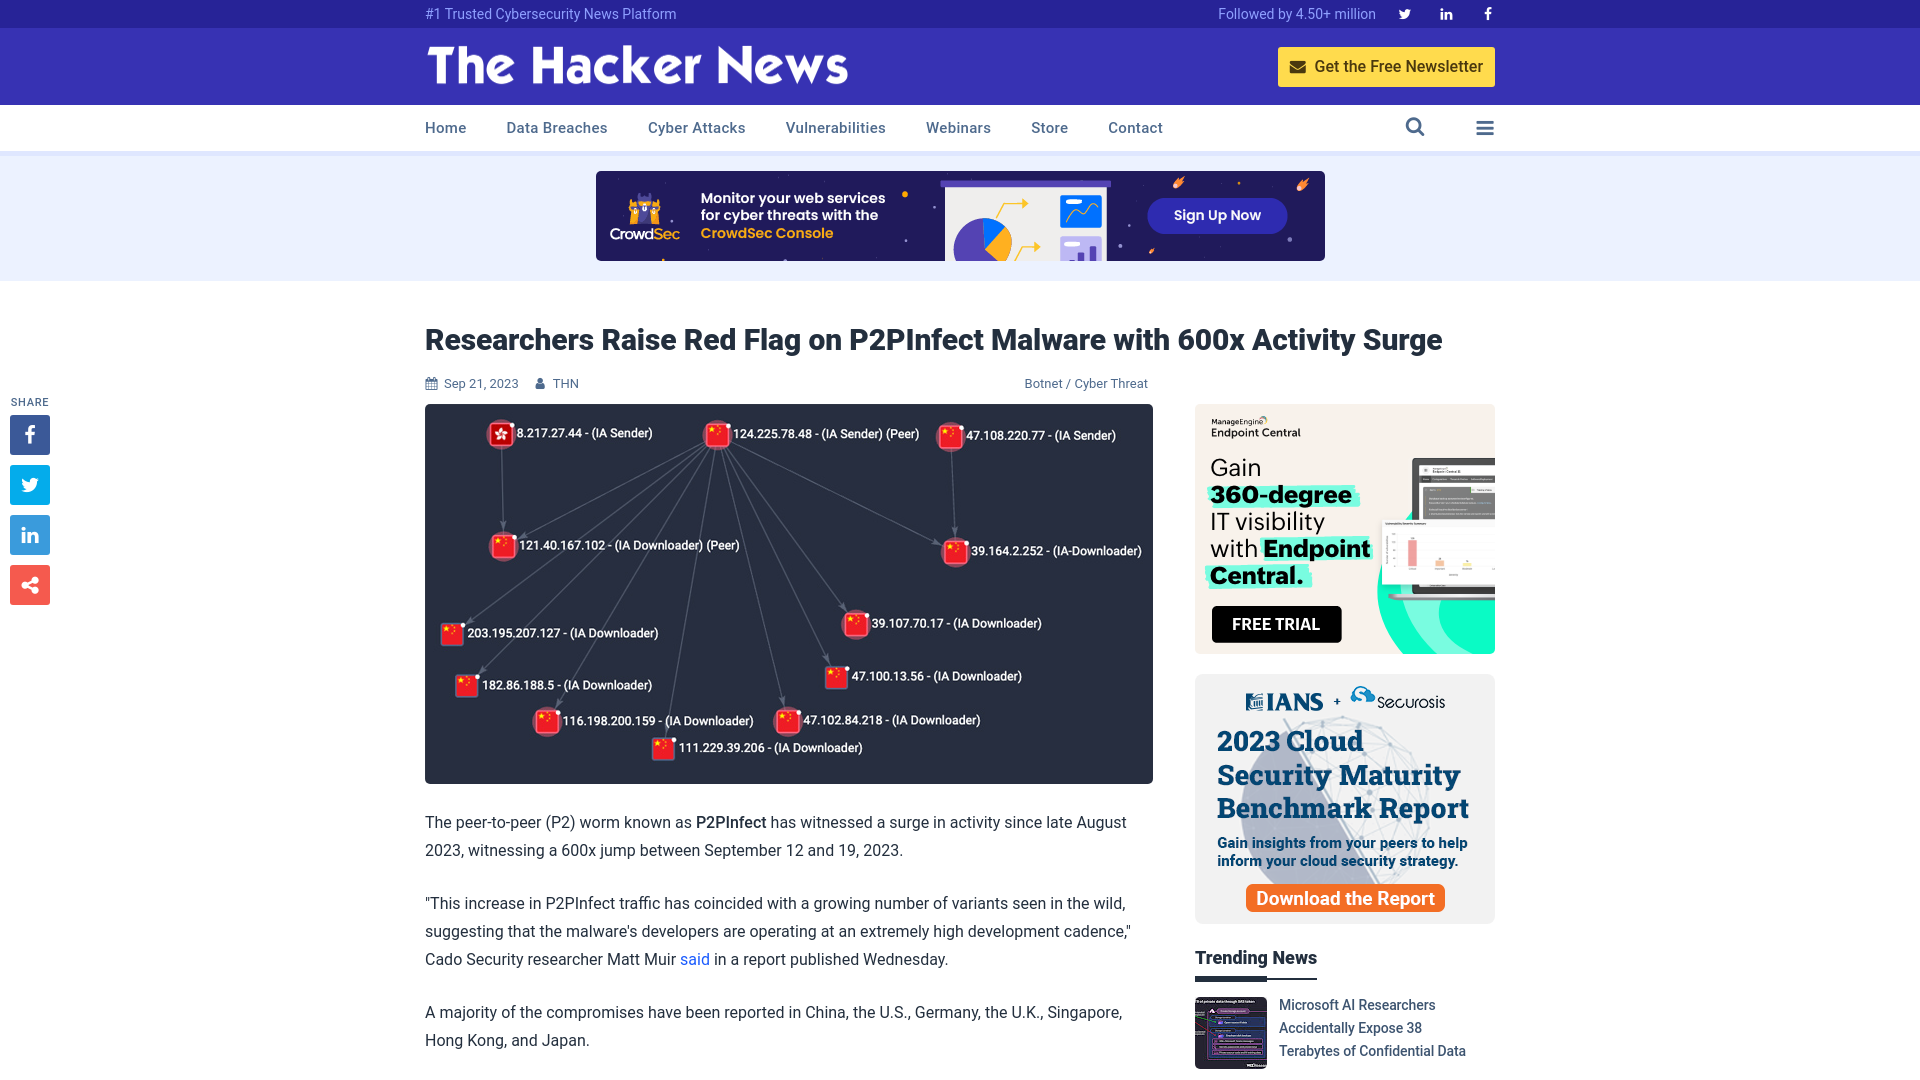 Researchers Raise Red Flag on P2PInfect Malware with 600x Activity Surge